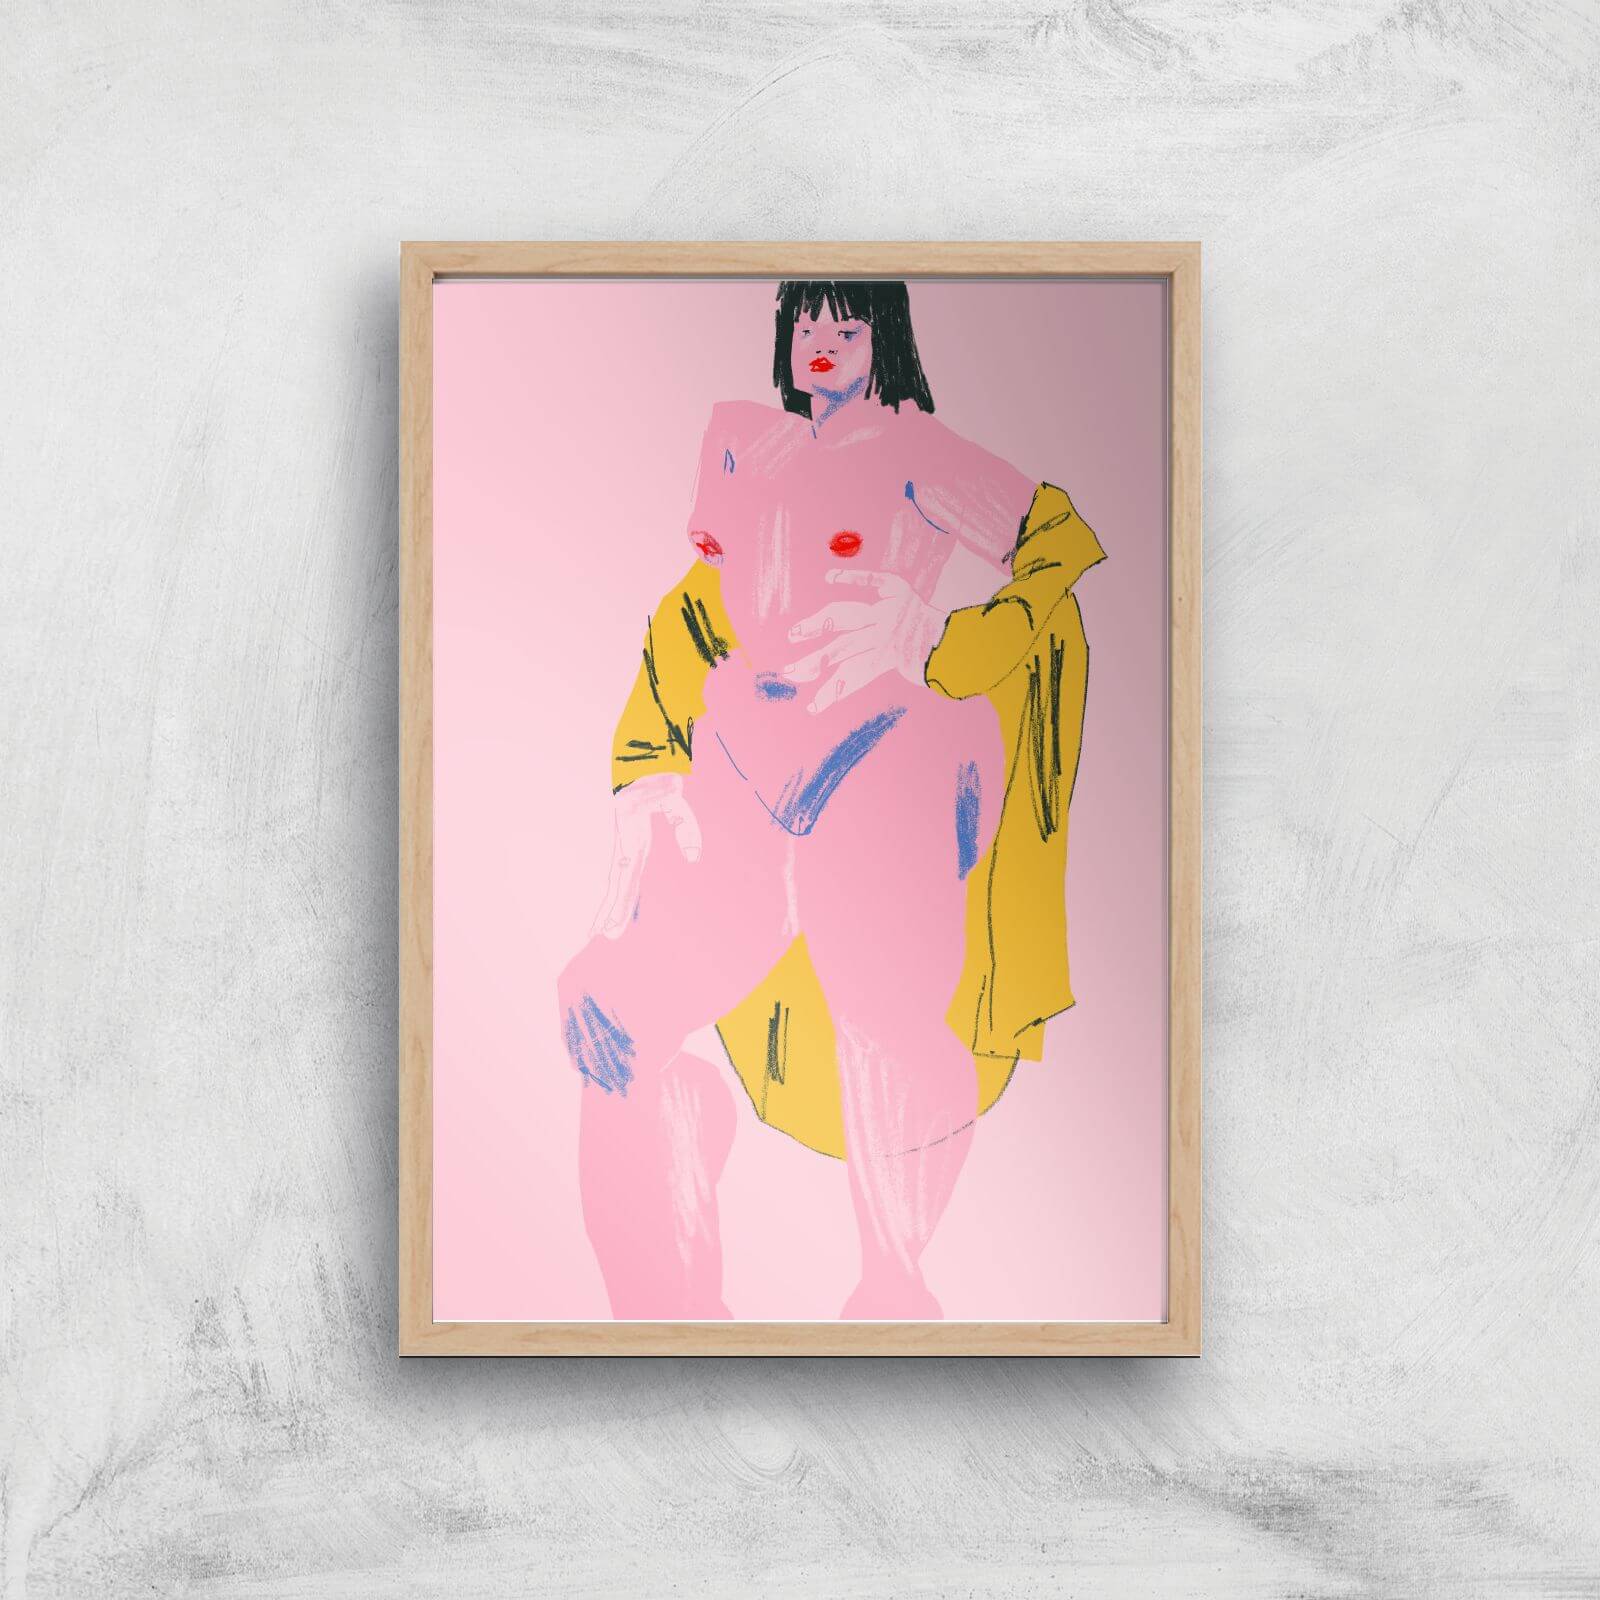 Pink & Yellow Nude Giclee Art Print - A2 - Wooden Frame